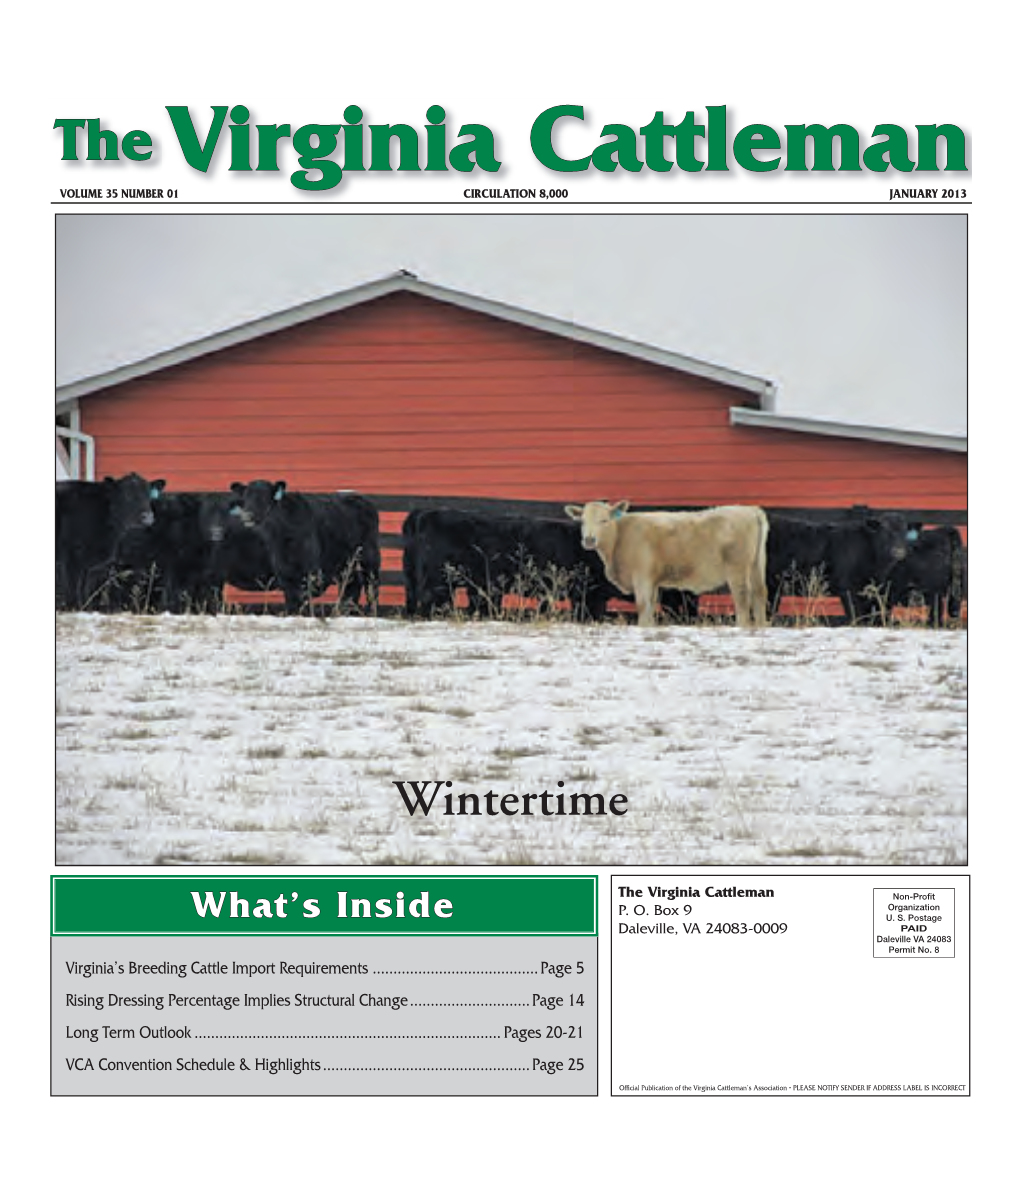 THE VIRGINIA CATTLEMAN–JANUARY 2013–PAGE 1 the Virginia Cattleman VOLUME 35 NUMBER 01 CIRCULATION 8,000 JANUARY 2013